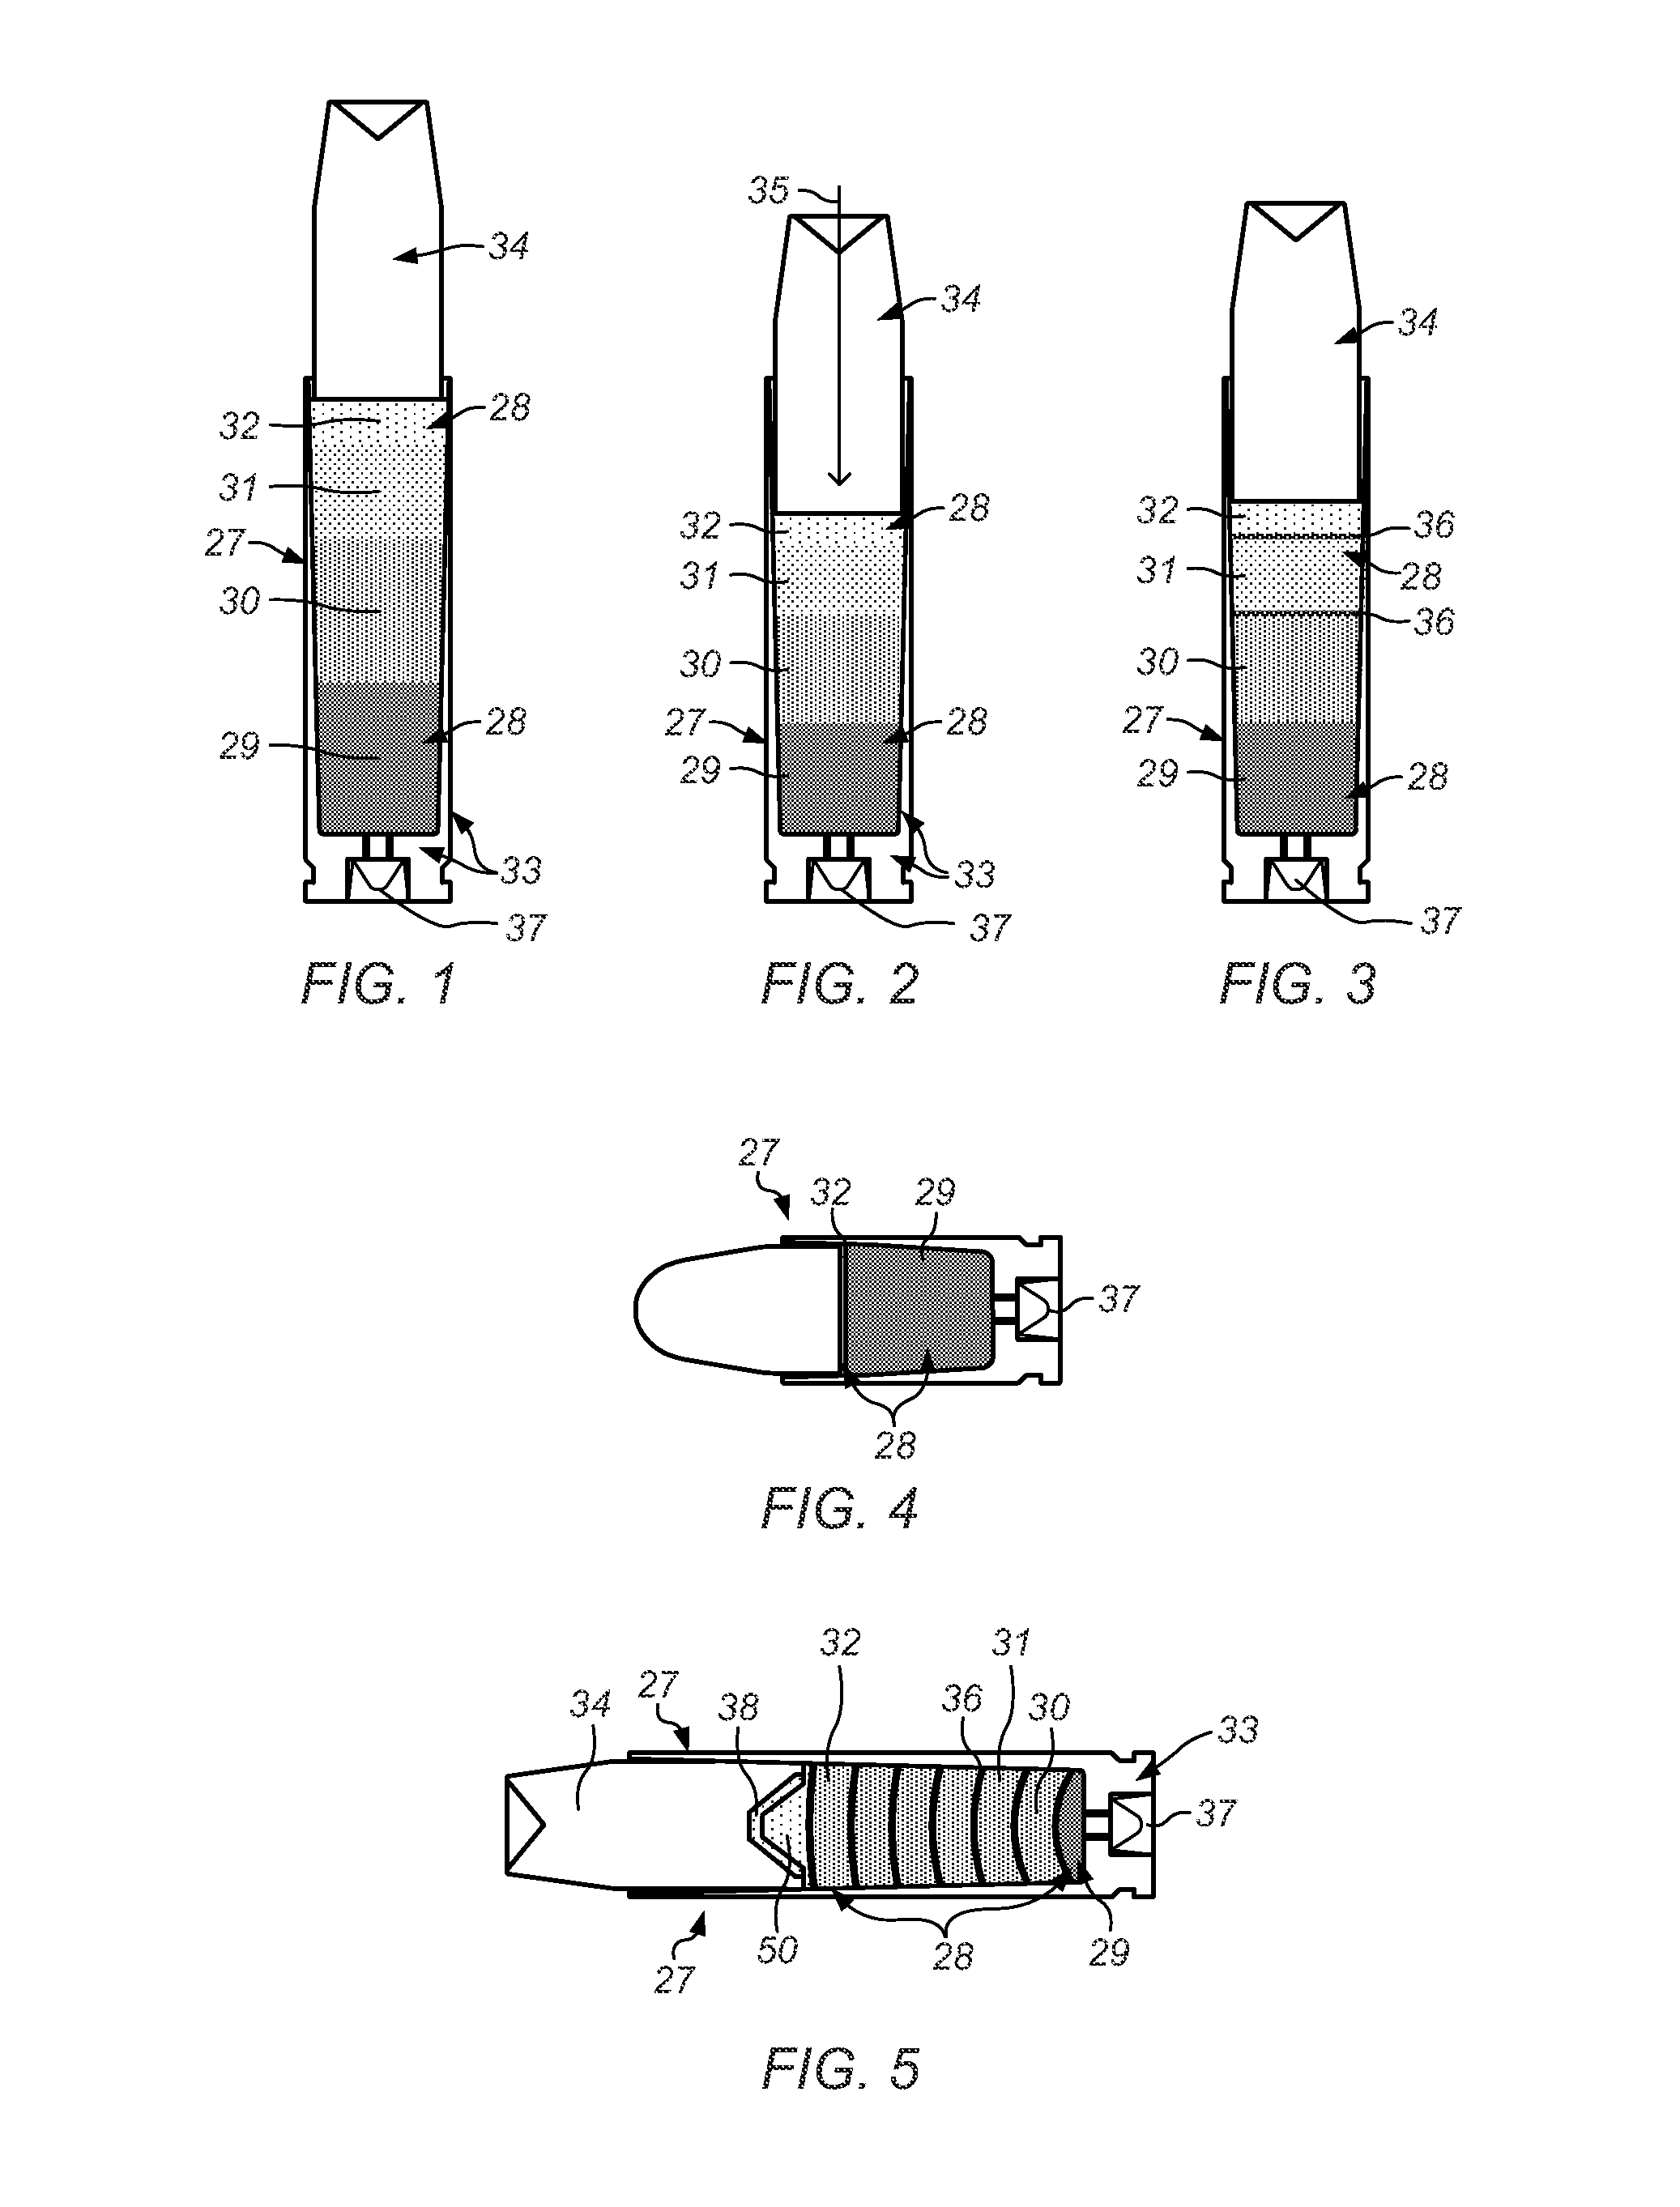 Cartridge with Rapidly Increasing Sequential Ignitions for Guns and Ordnances